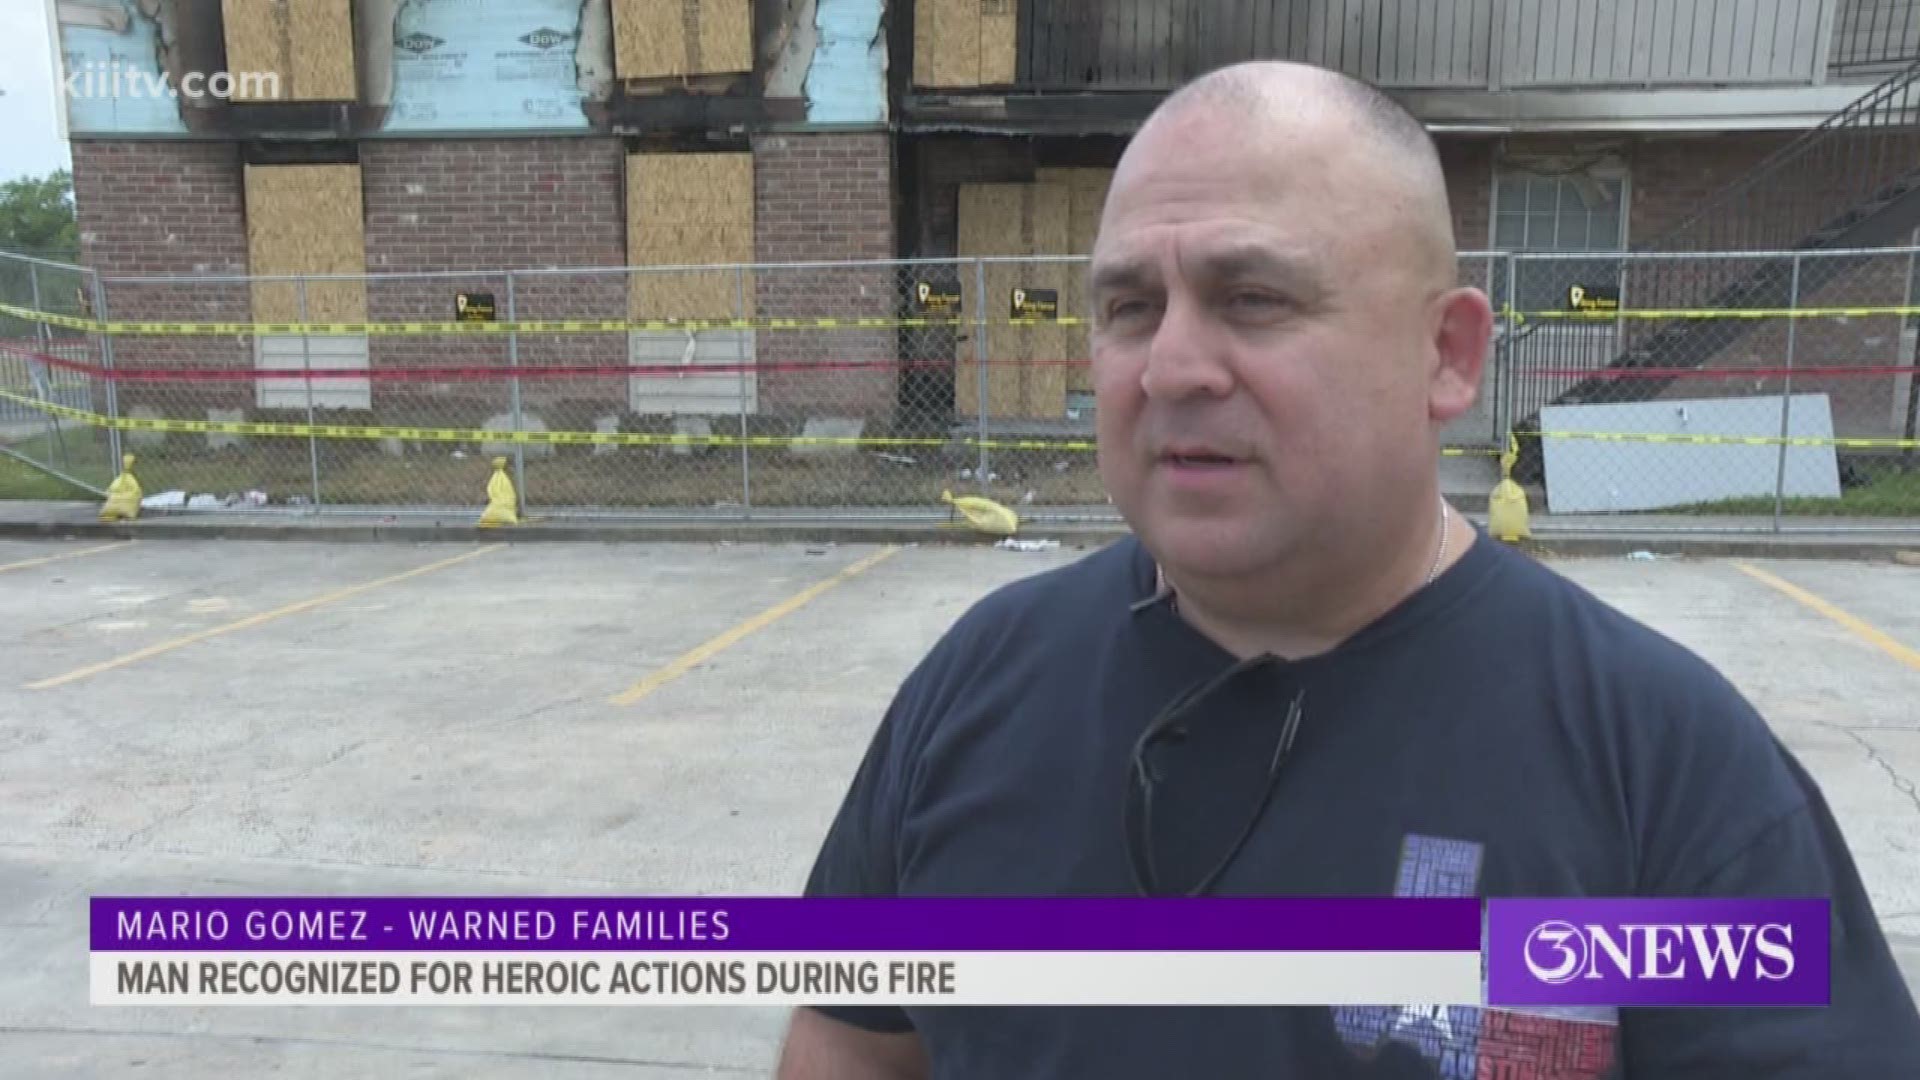 Firefighters from both Annaville and Corpus Christi were able to quickly battle the heavy flames and smoke, but the damage displaced everyone who lived in the building.